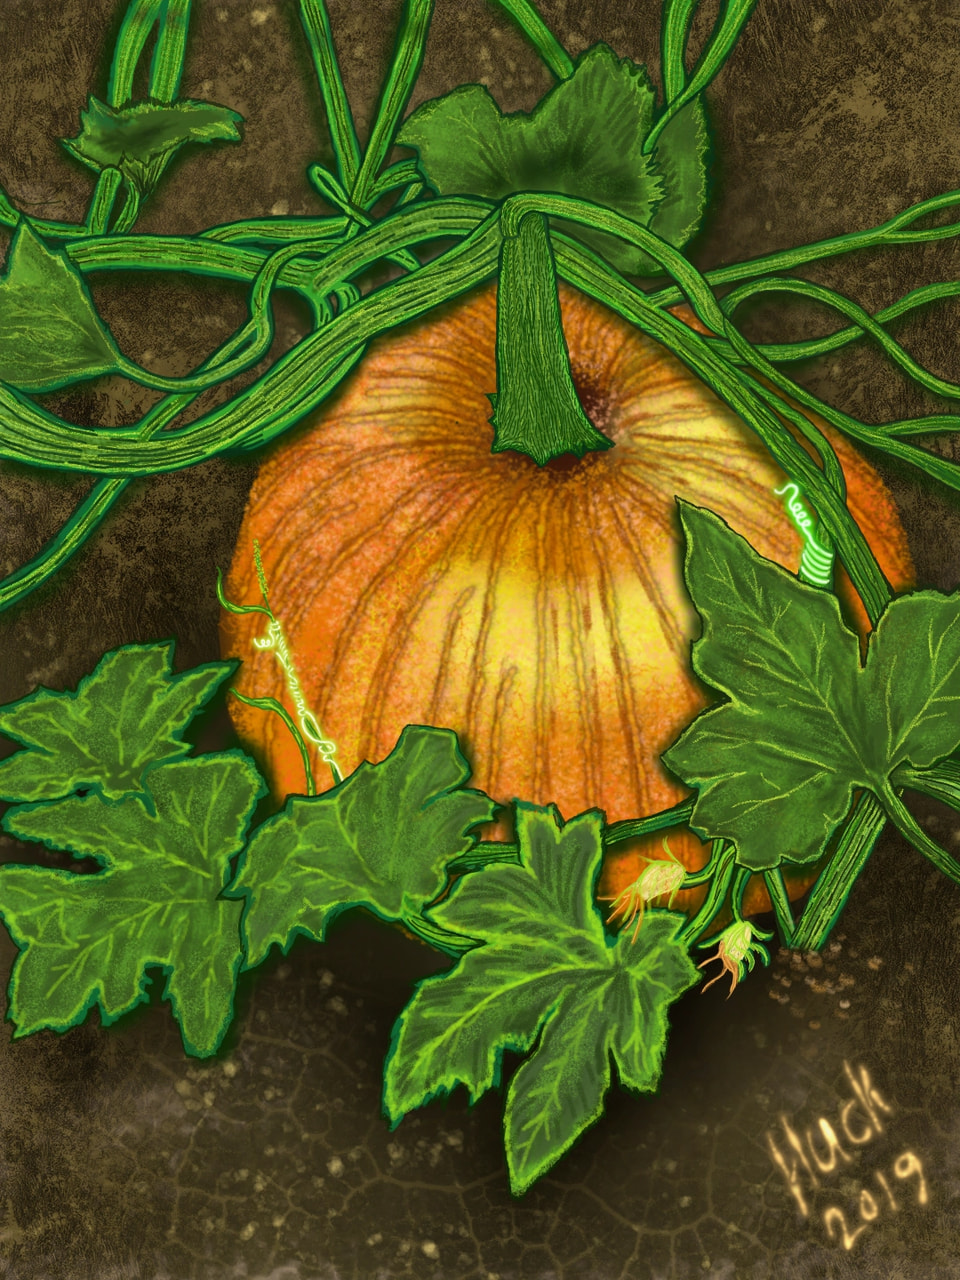 The cool part about this earth....last year I left a pumpkin to be exposed to the elements and in the spring it came back to life with others to follow. #fridaysforfuture #fridayswithsketch #thegreatpumpkin #Plant #100PercentSketch #hucksart